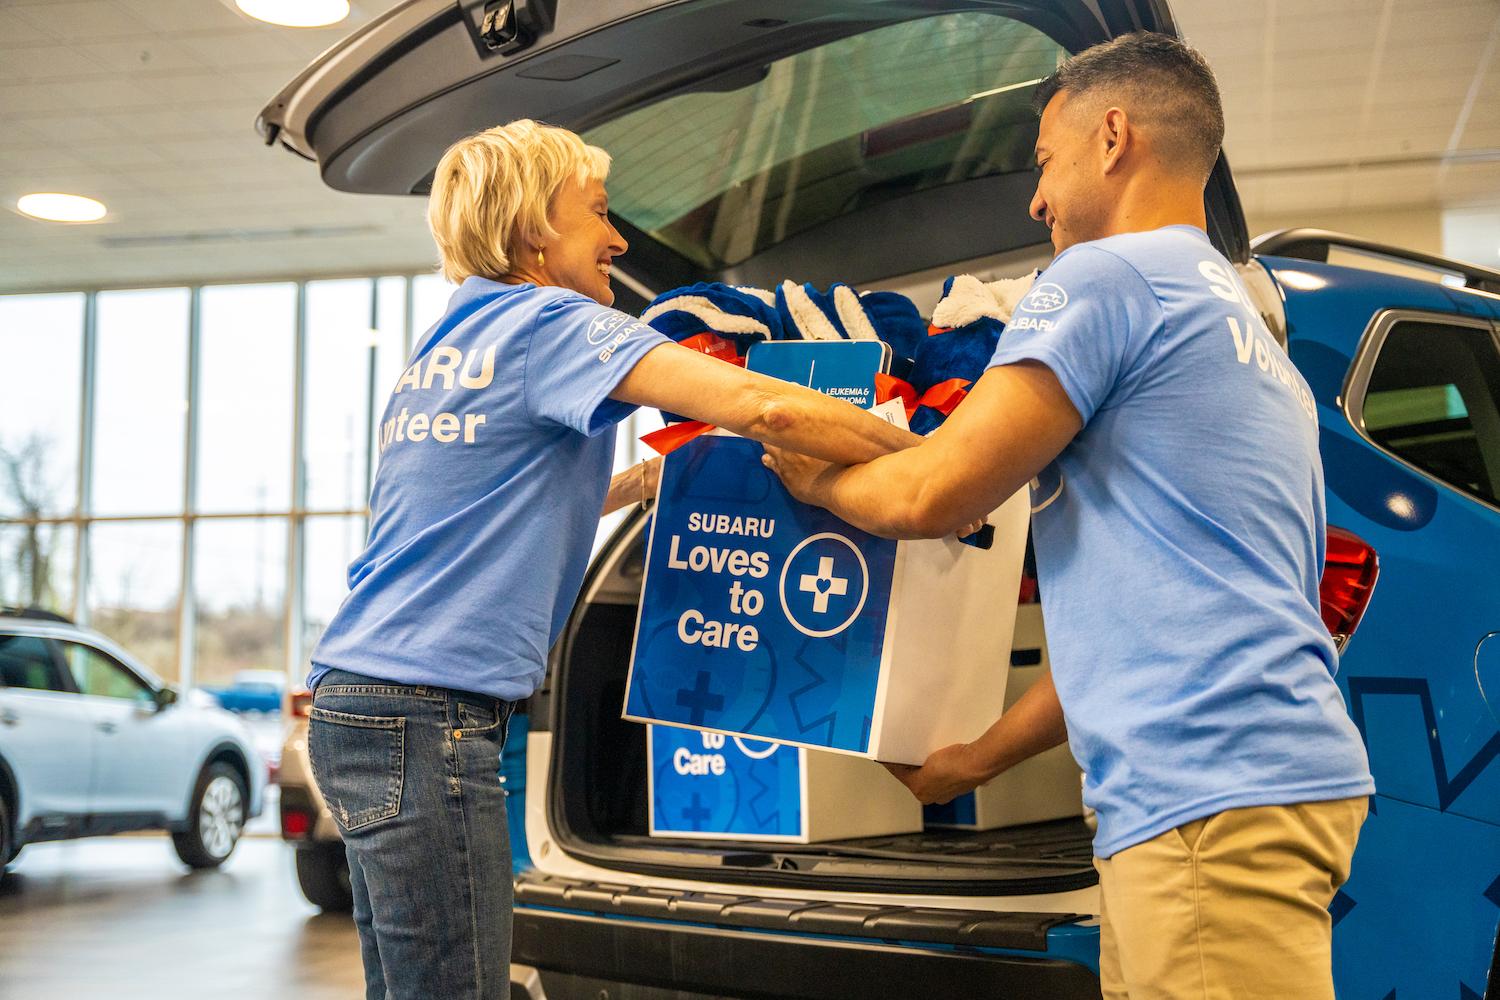 Subaru Loves to Care partners with LLS to support cancer patients